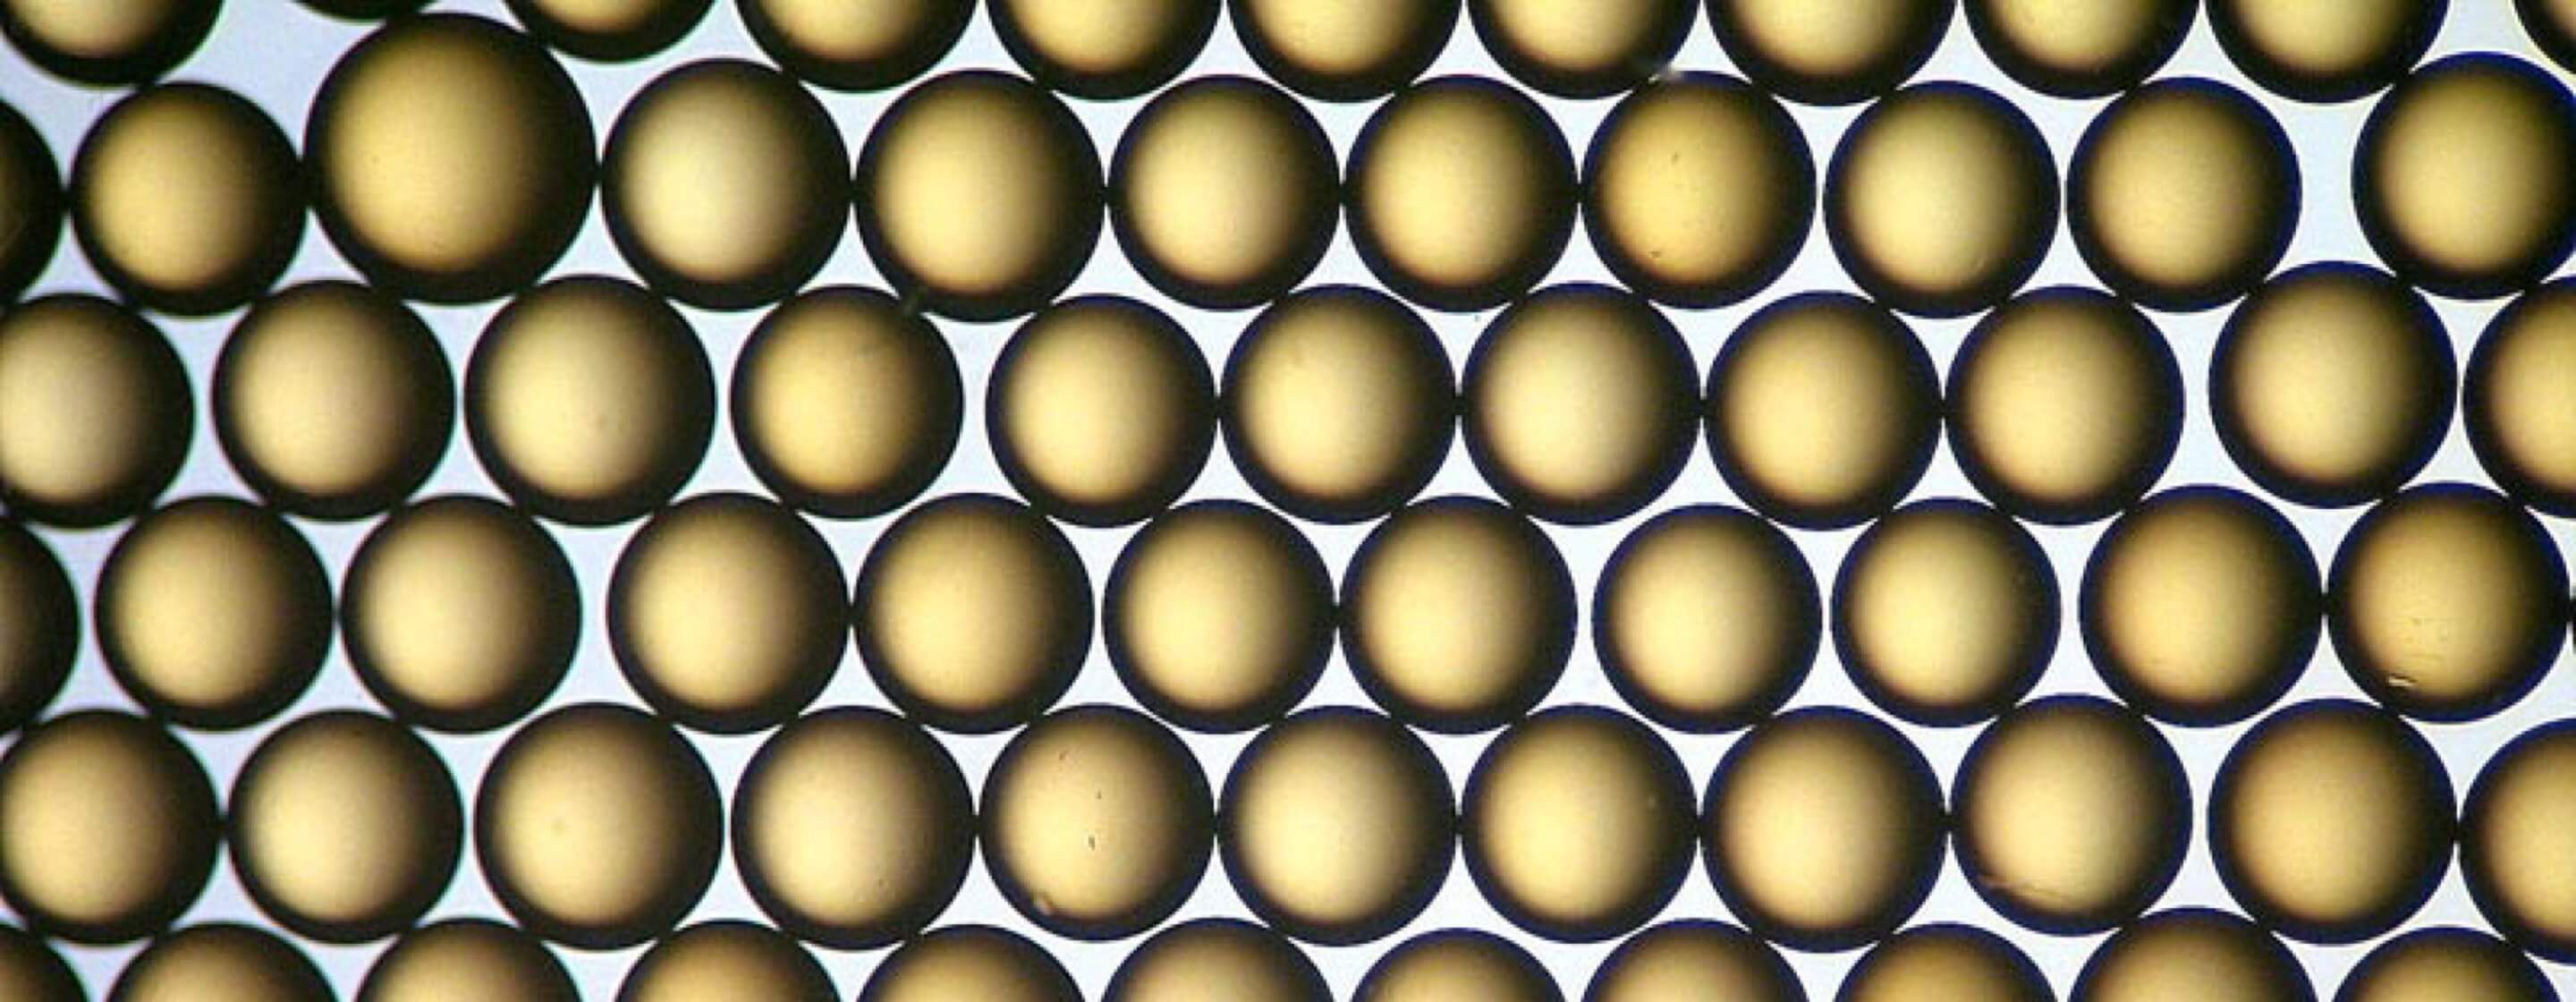  Microscopic image of amber-colored, spherical ion exchange resins resembling beads.